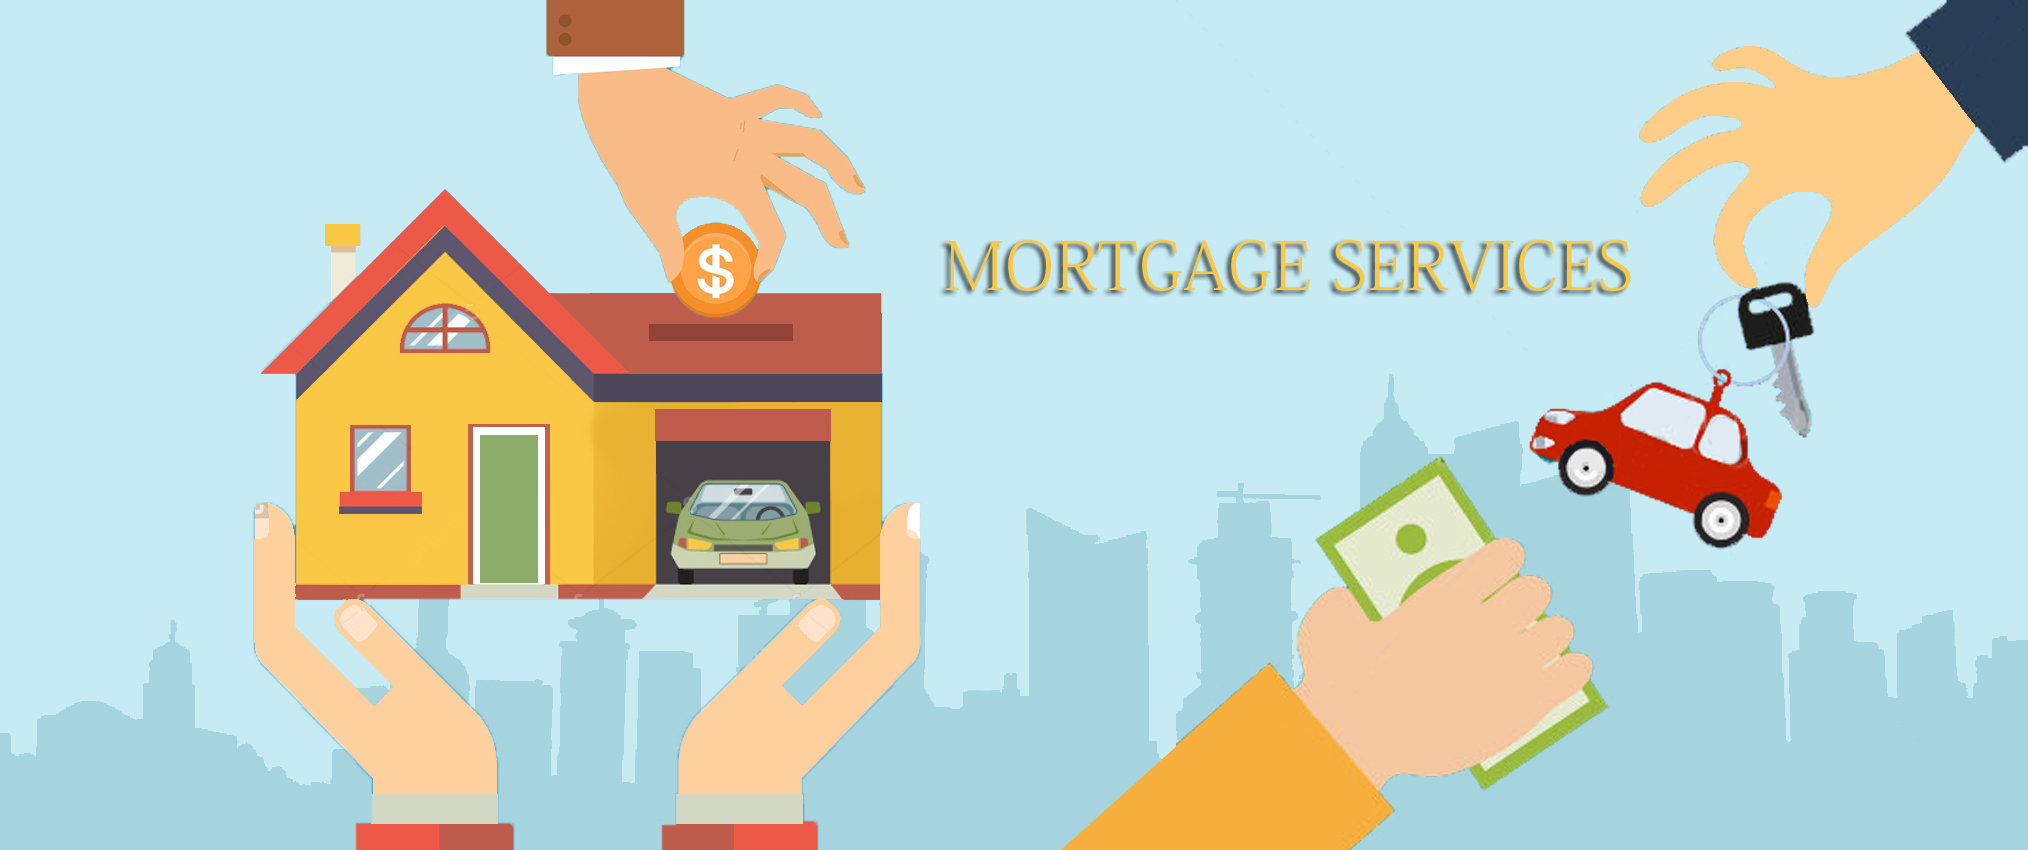 Deed Entry and Mortgage Processing Services